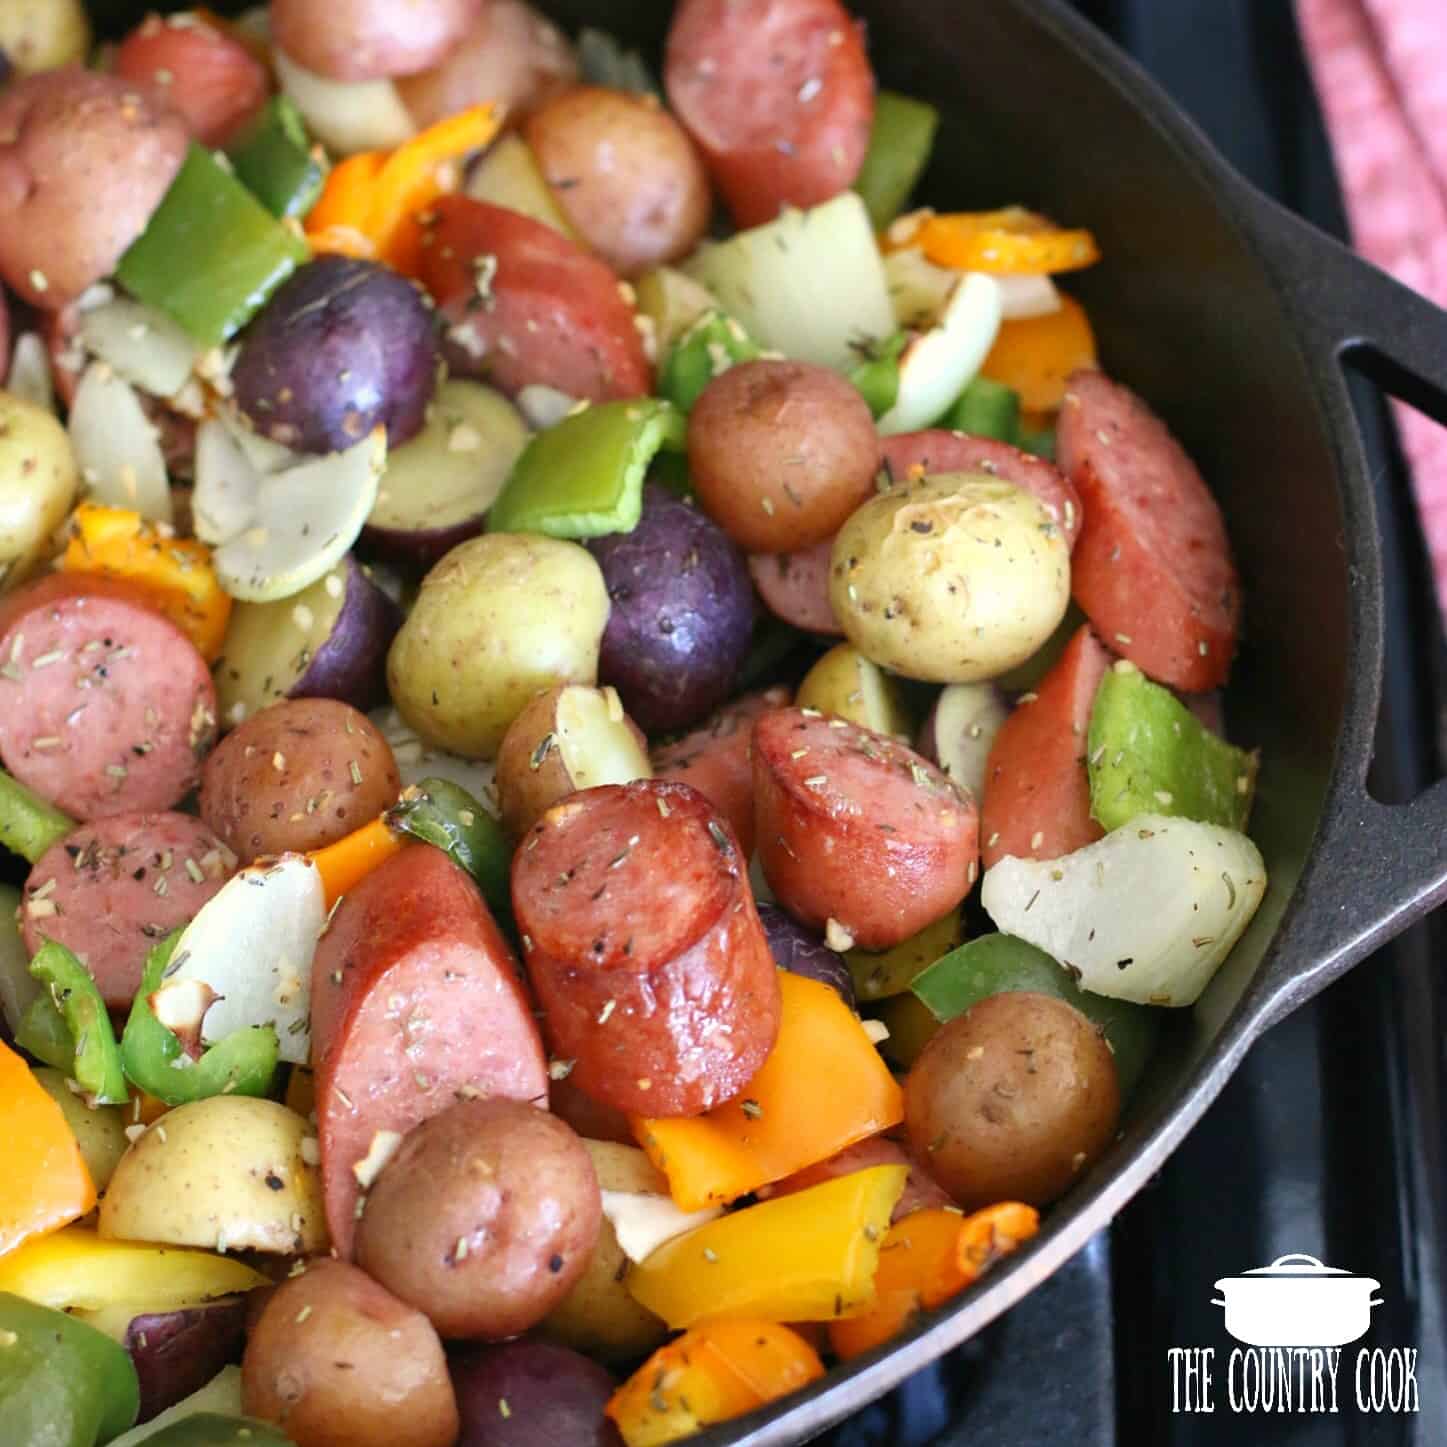 sliced kielbasa, baby potatoes, peppers and onions shown close up in a cast iron skillet.